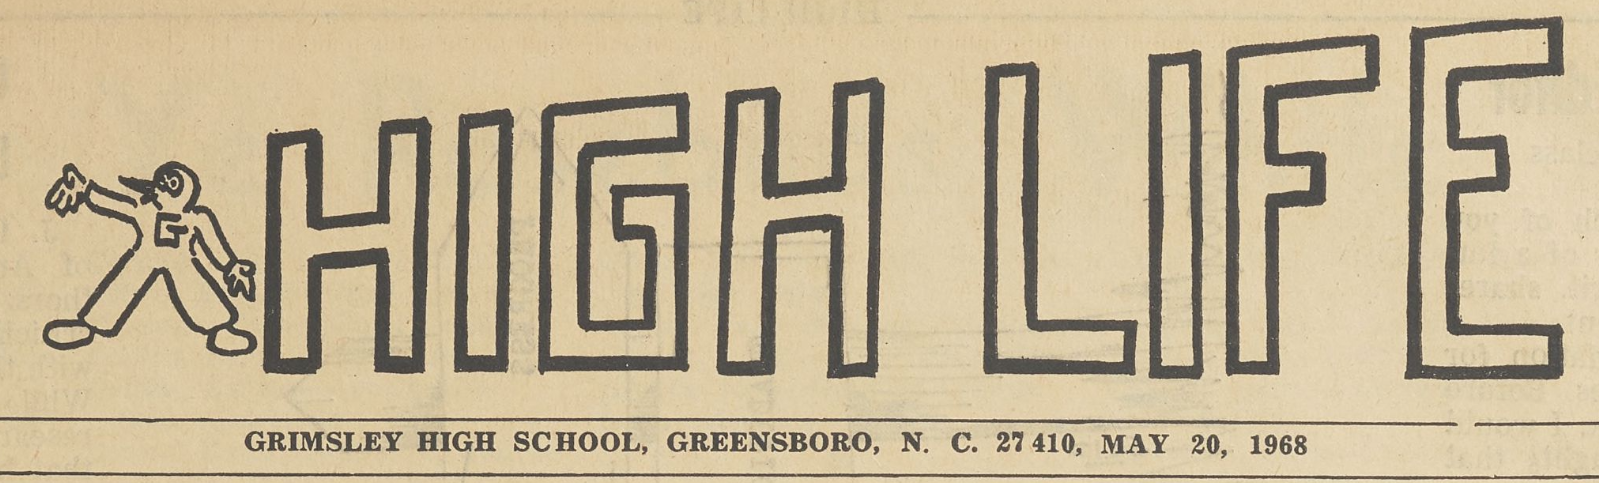 Header for the High Life newspaper. It reads: High Life. Grimsley High School, Greensboro, NC 27410, May 20, 1968.